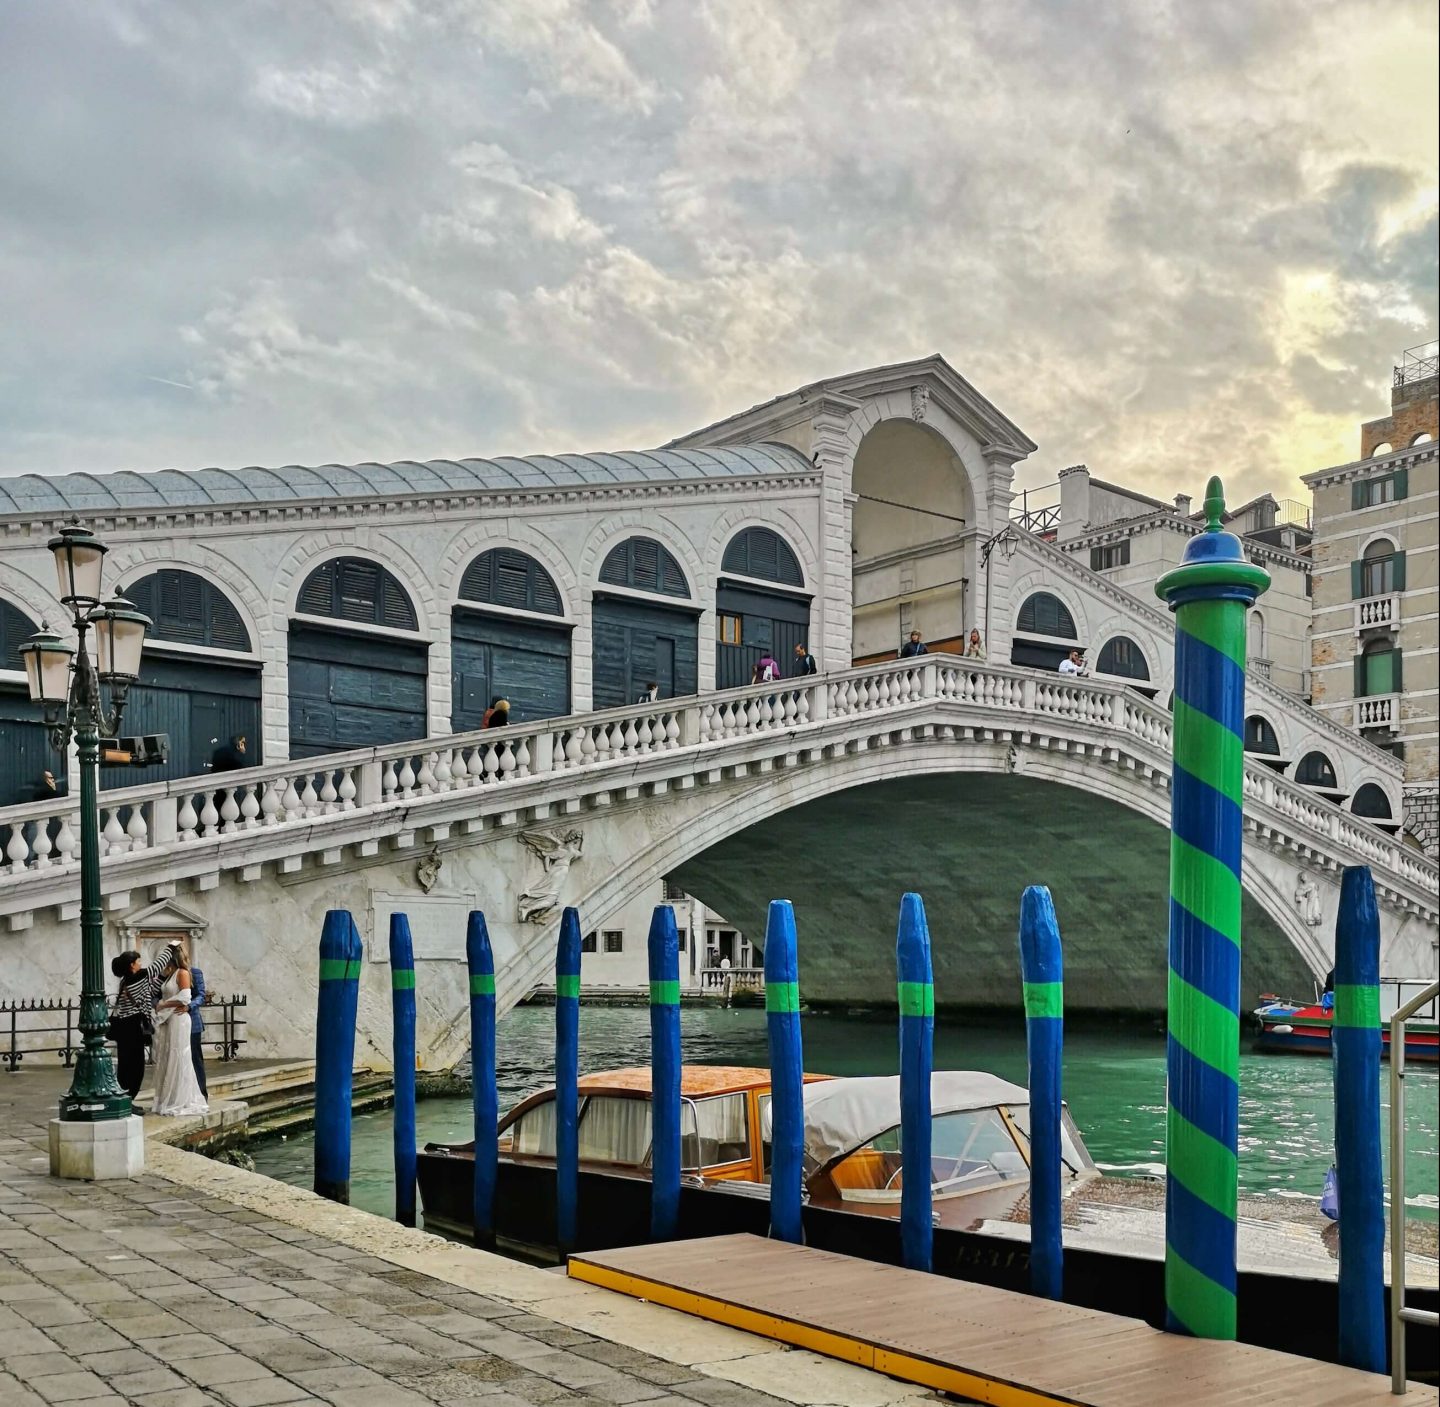 New Shades of Hippy - Anneka Nicholls - travel blog and green living - 24 hours in Venice, Italy - Rialto Bridge, Venice